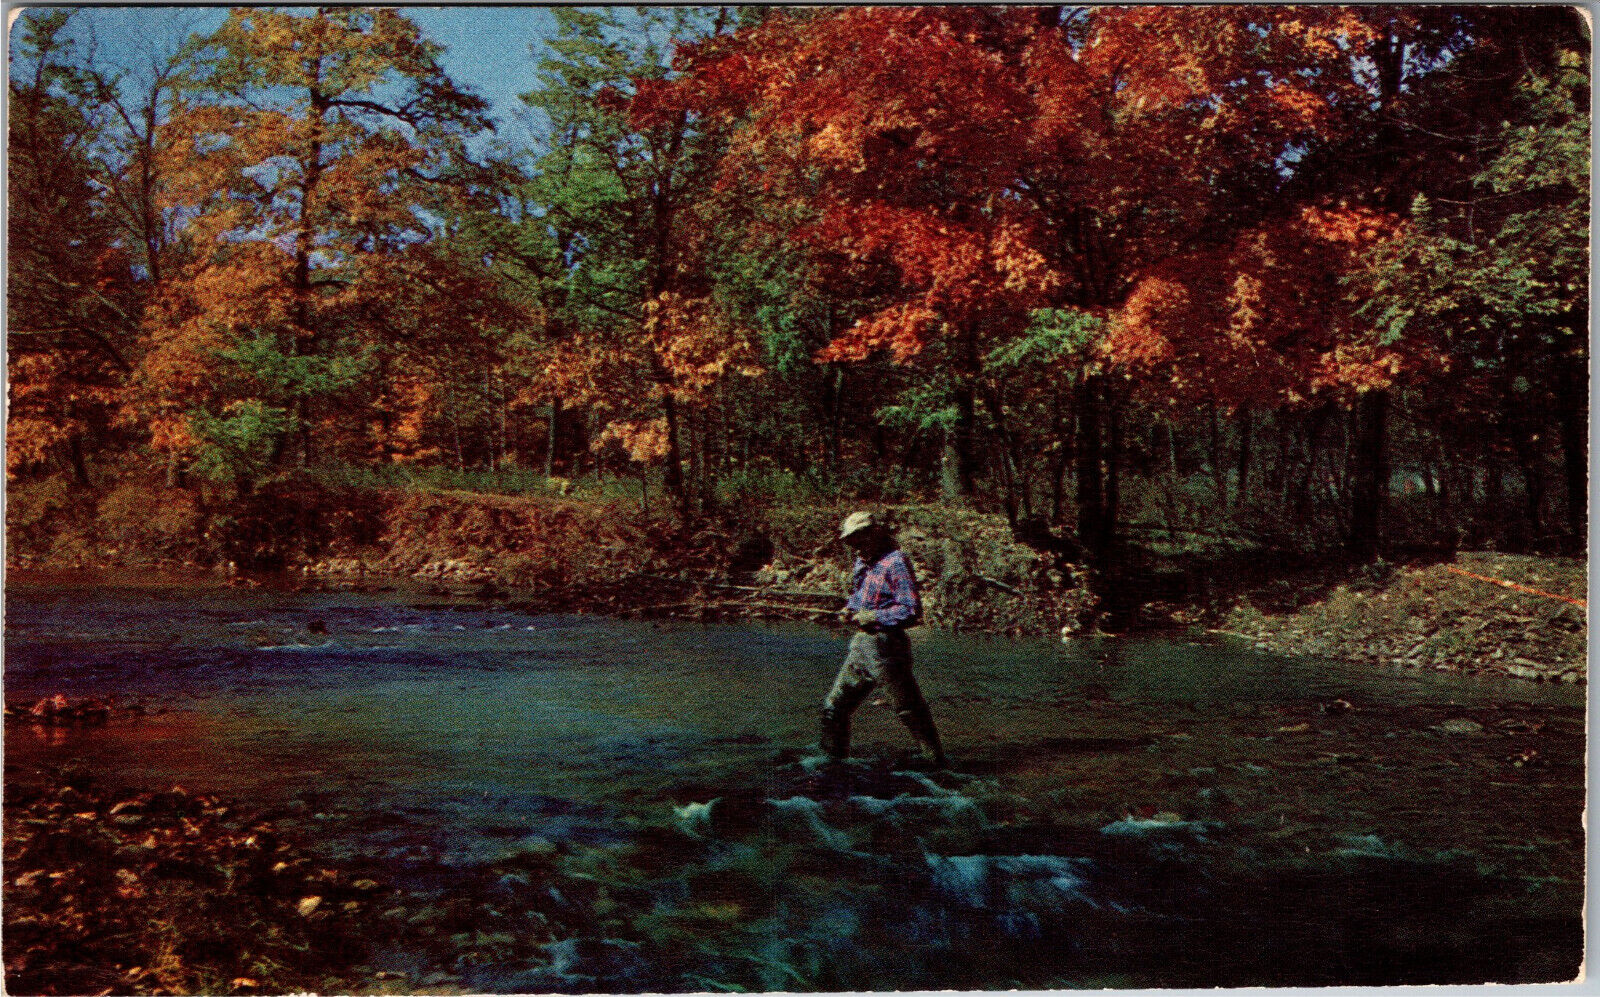 Fishing in Stream, Autumn Leaves Changing Colors Vintage Postcard